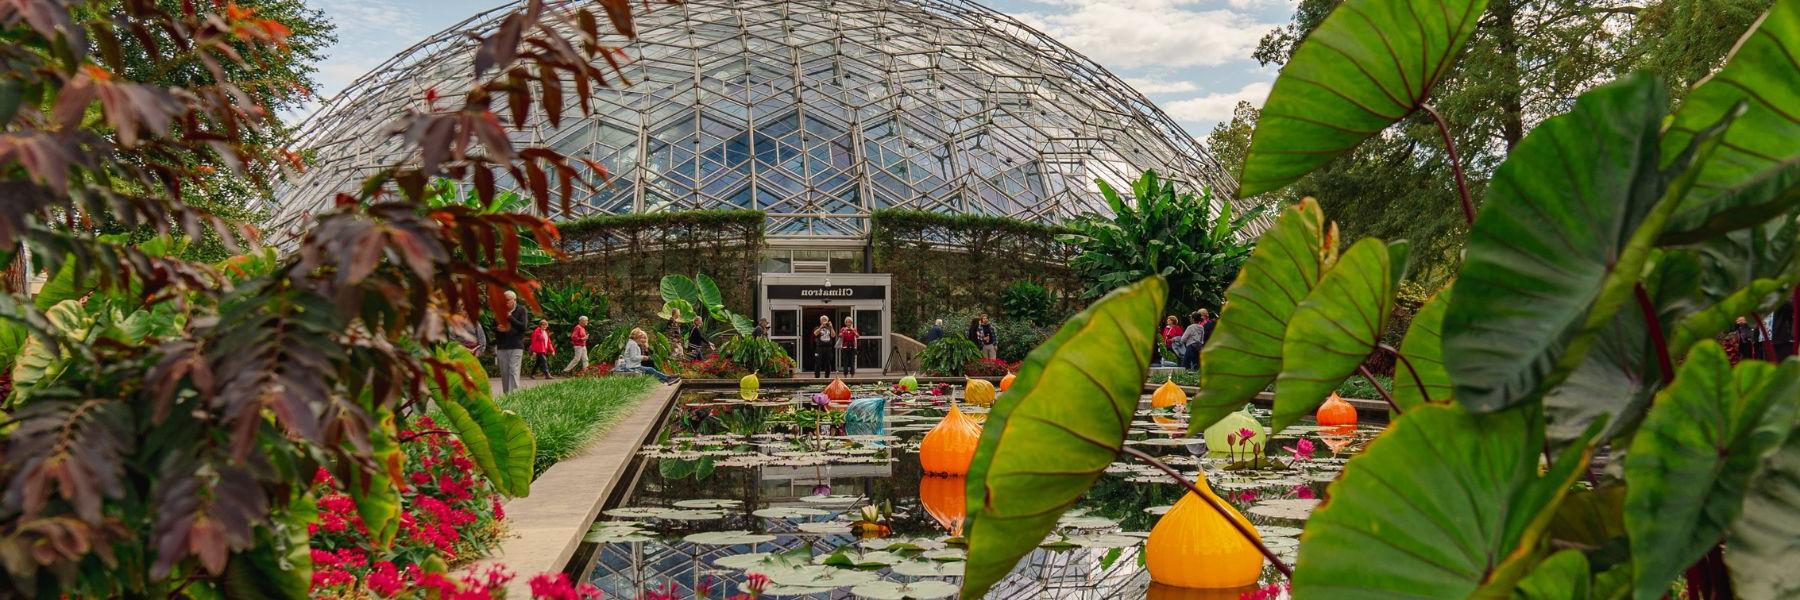 The Missouri Botanical Garden is an important part of St. Louis arts and culture.